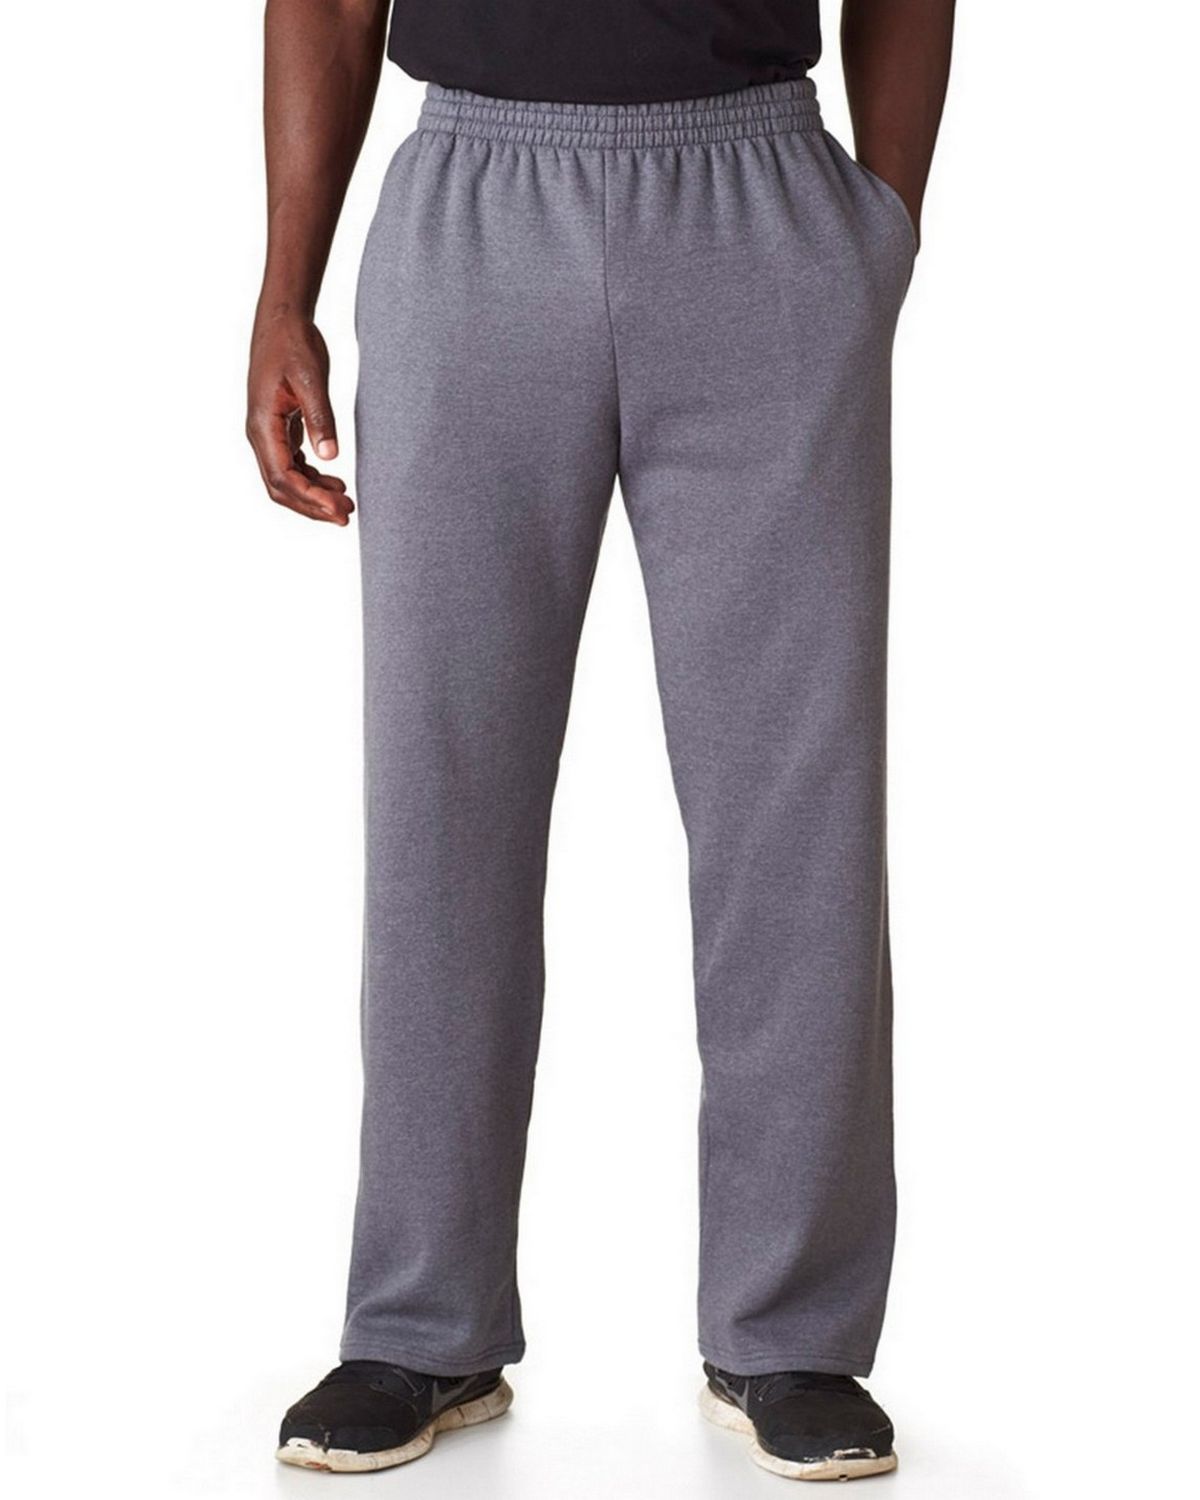 Fruit of the Loom SF74 Adult Sofspun Open-Bottom Sweatpants with ...